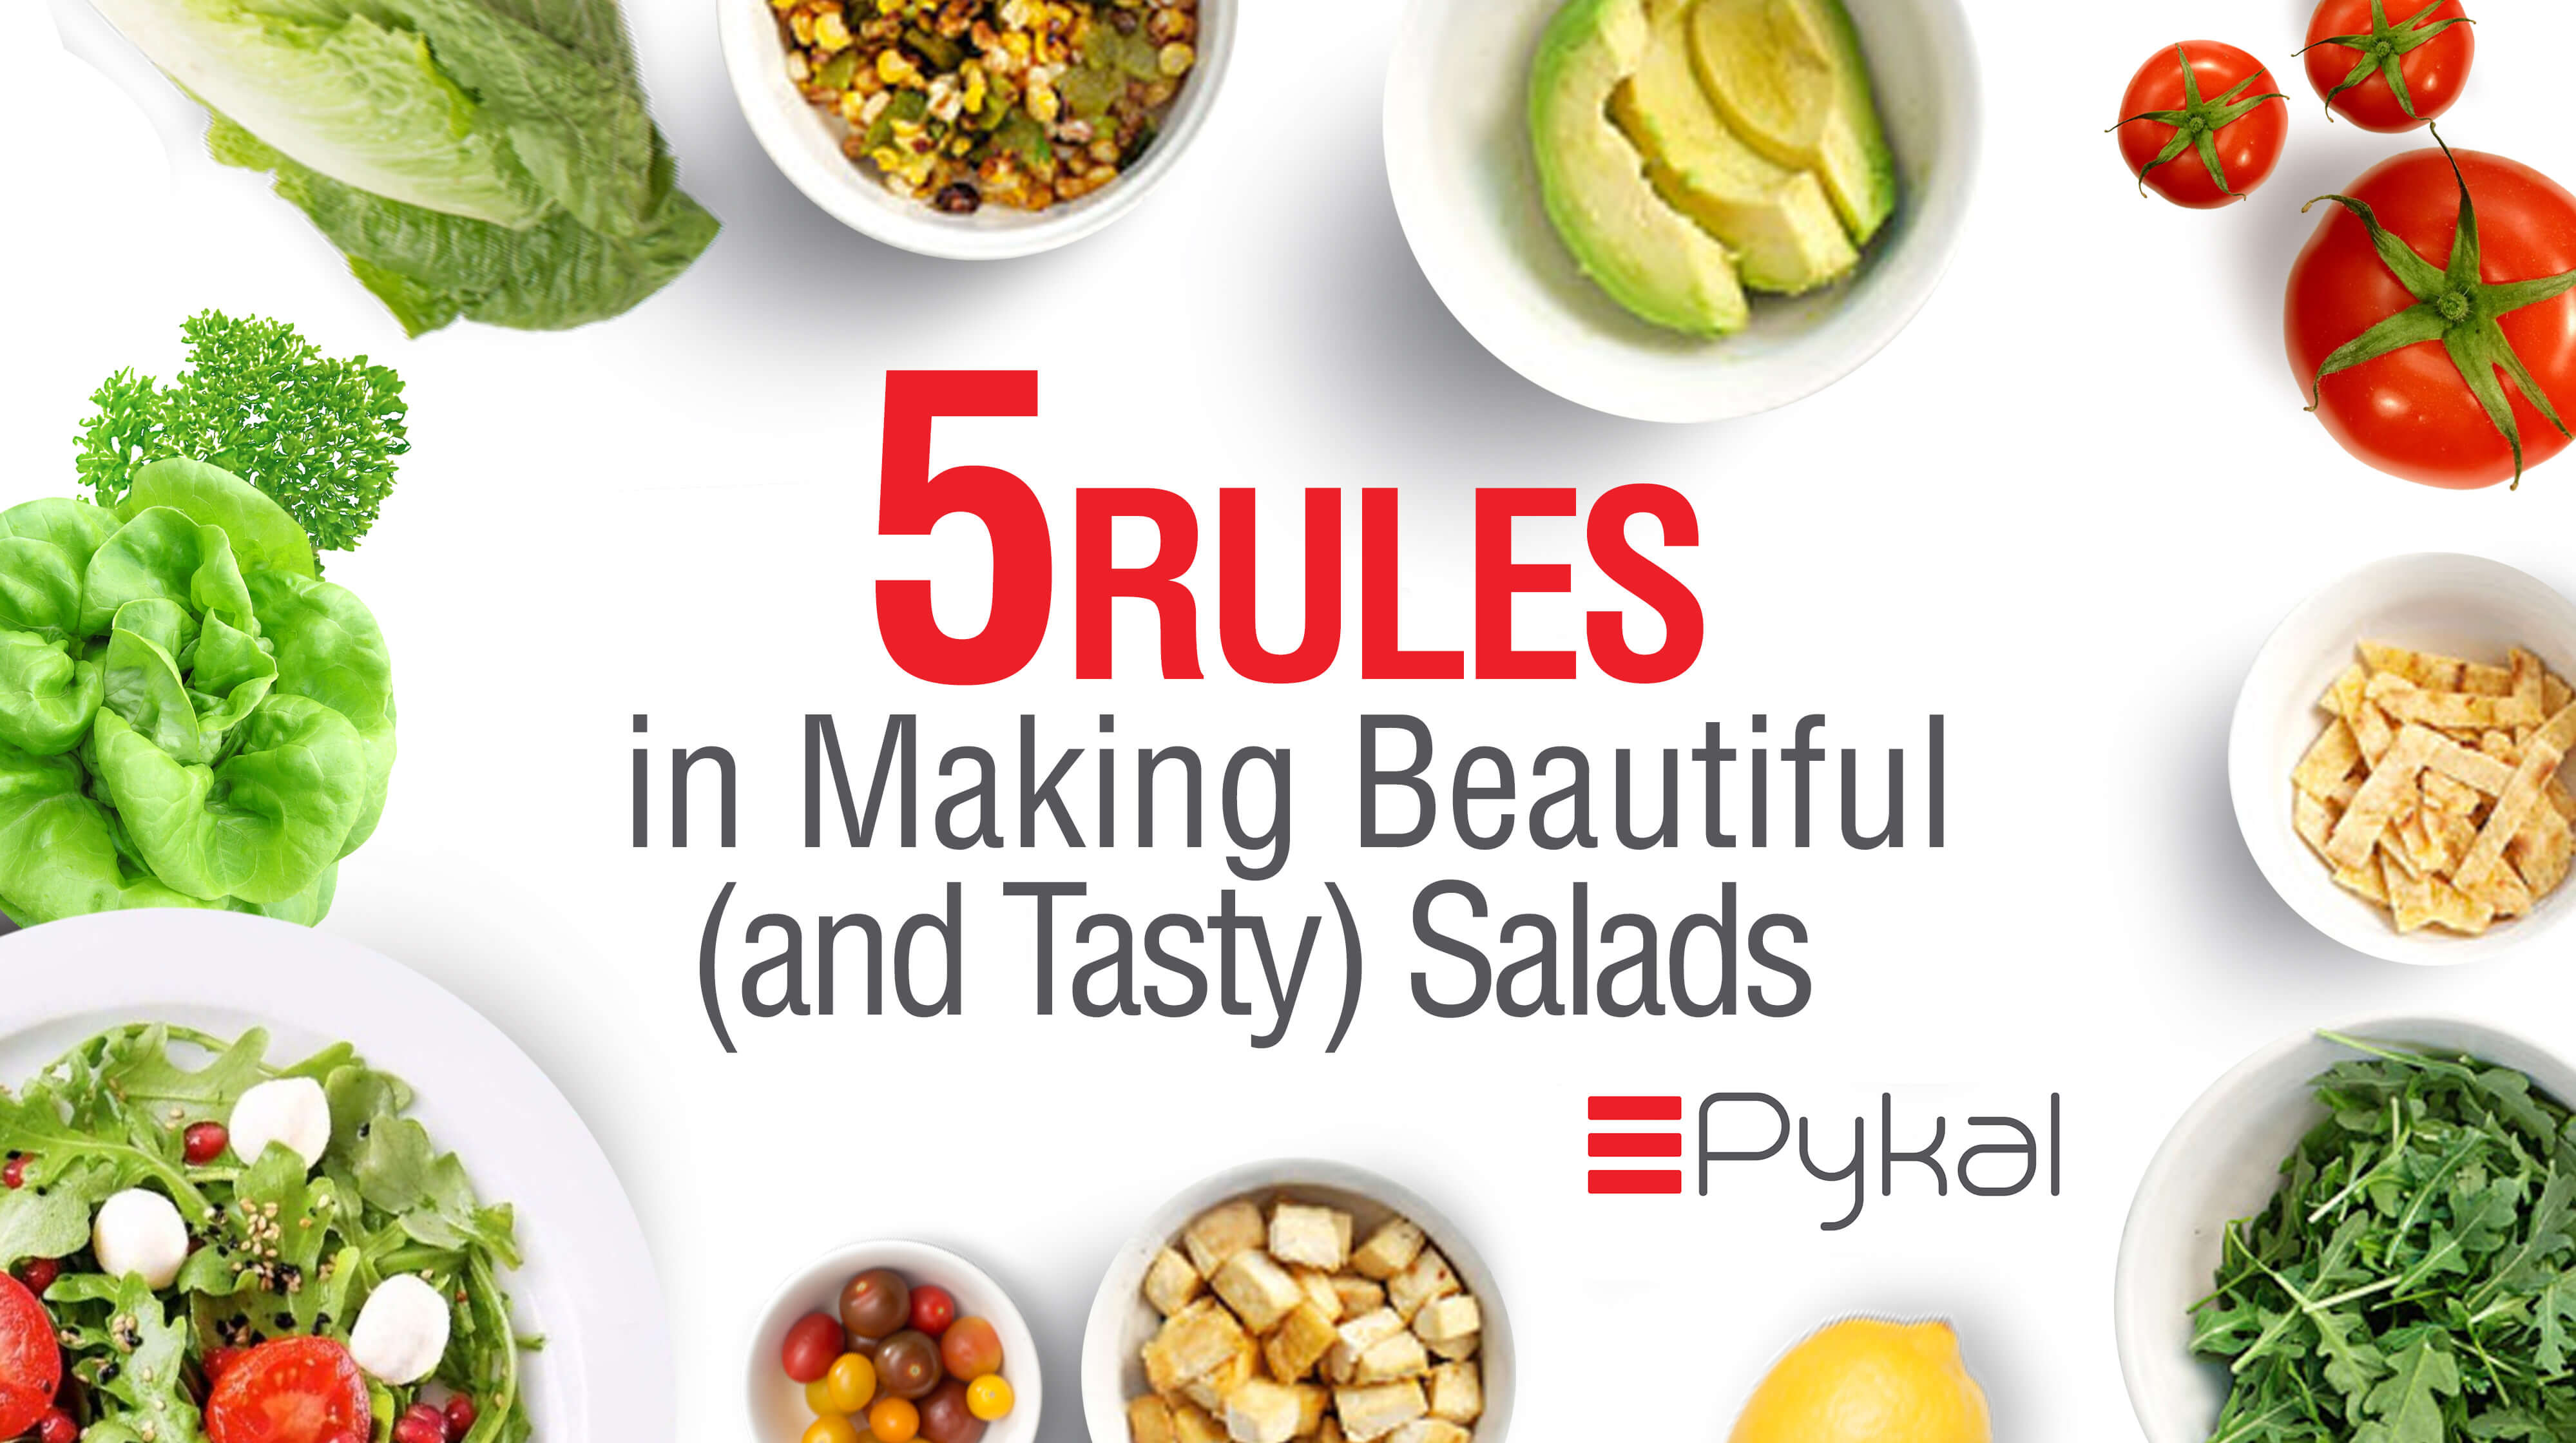 5 RULES IN MAKING BEAUTIFUL (AND TASTY) SALAD